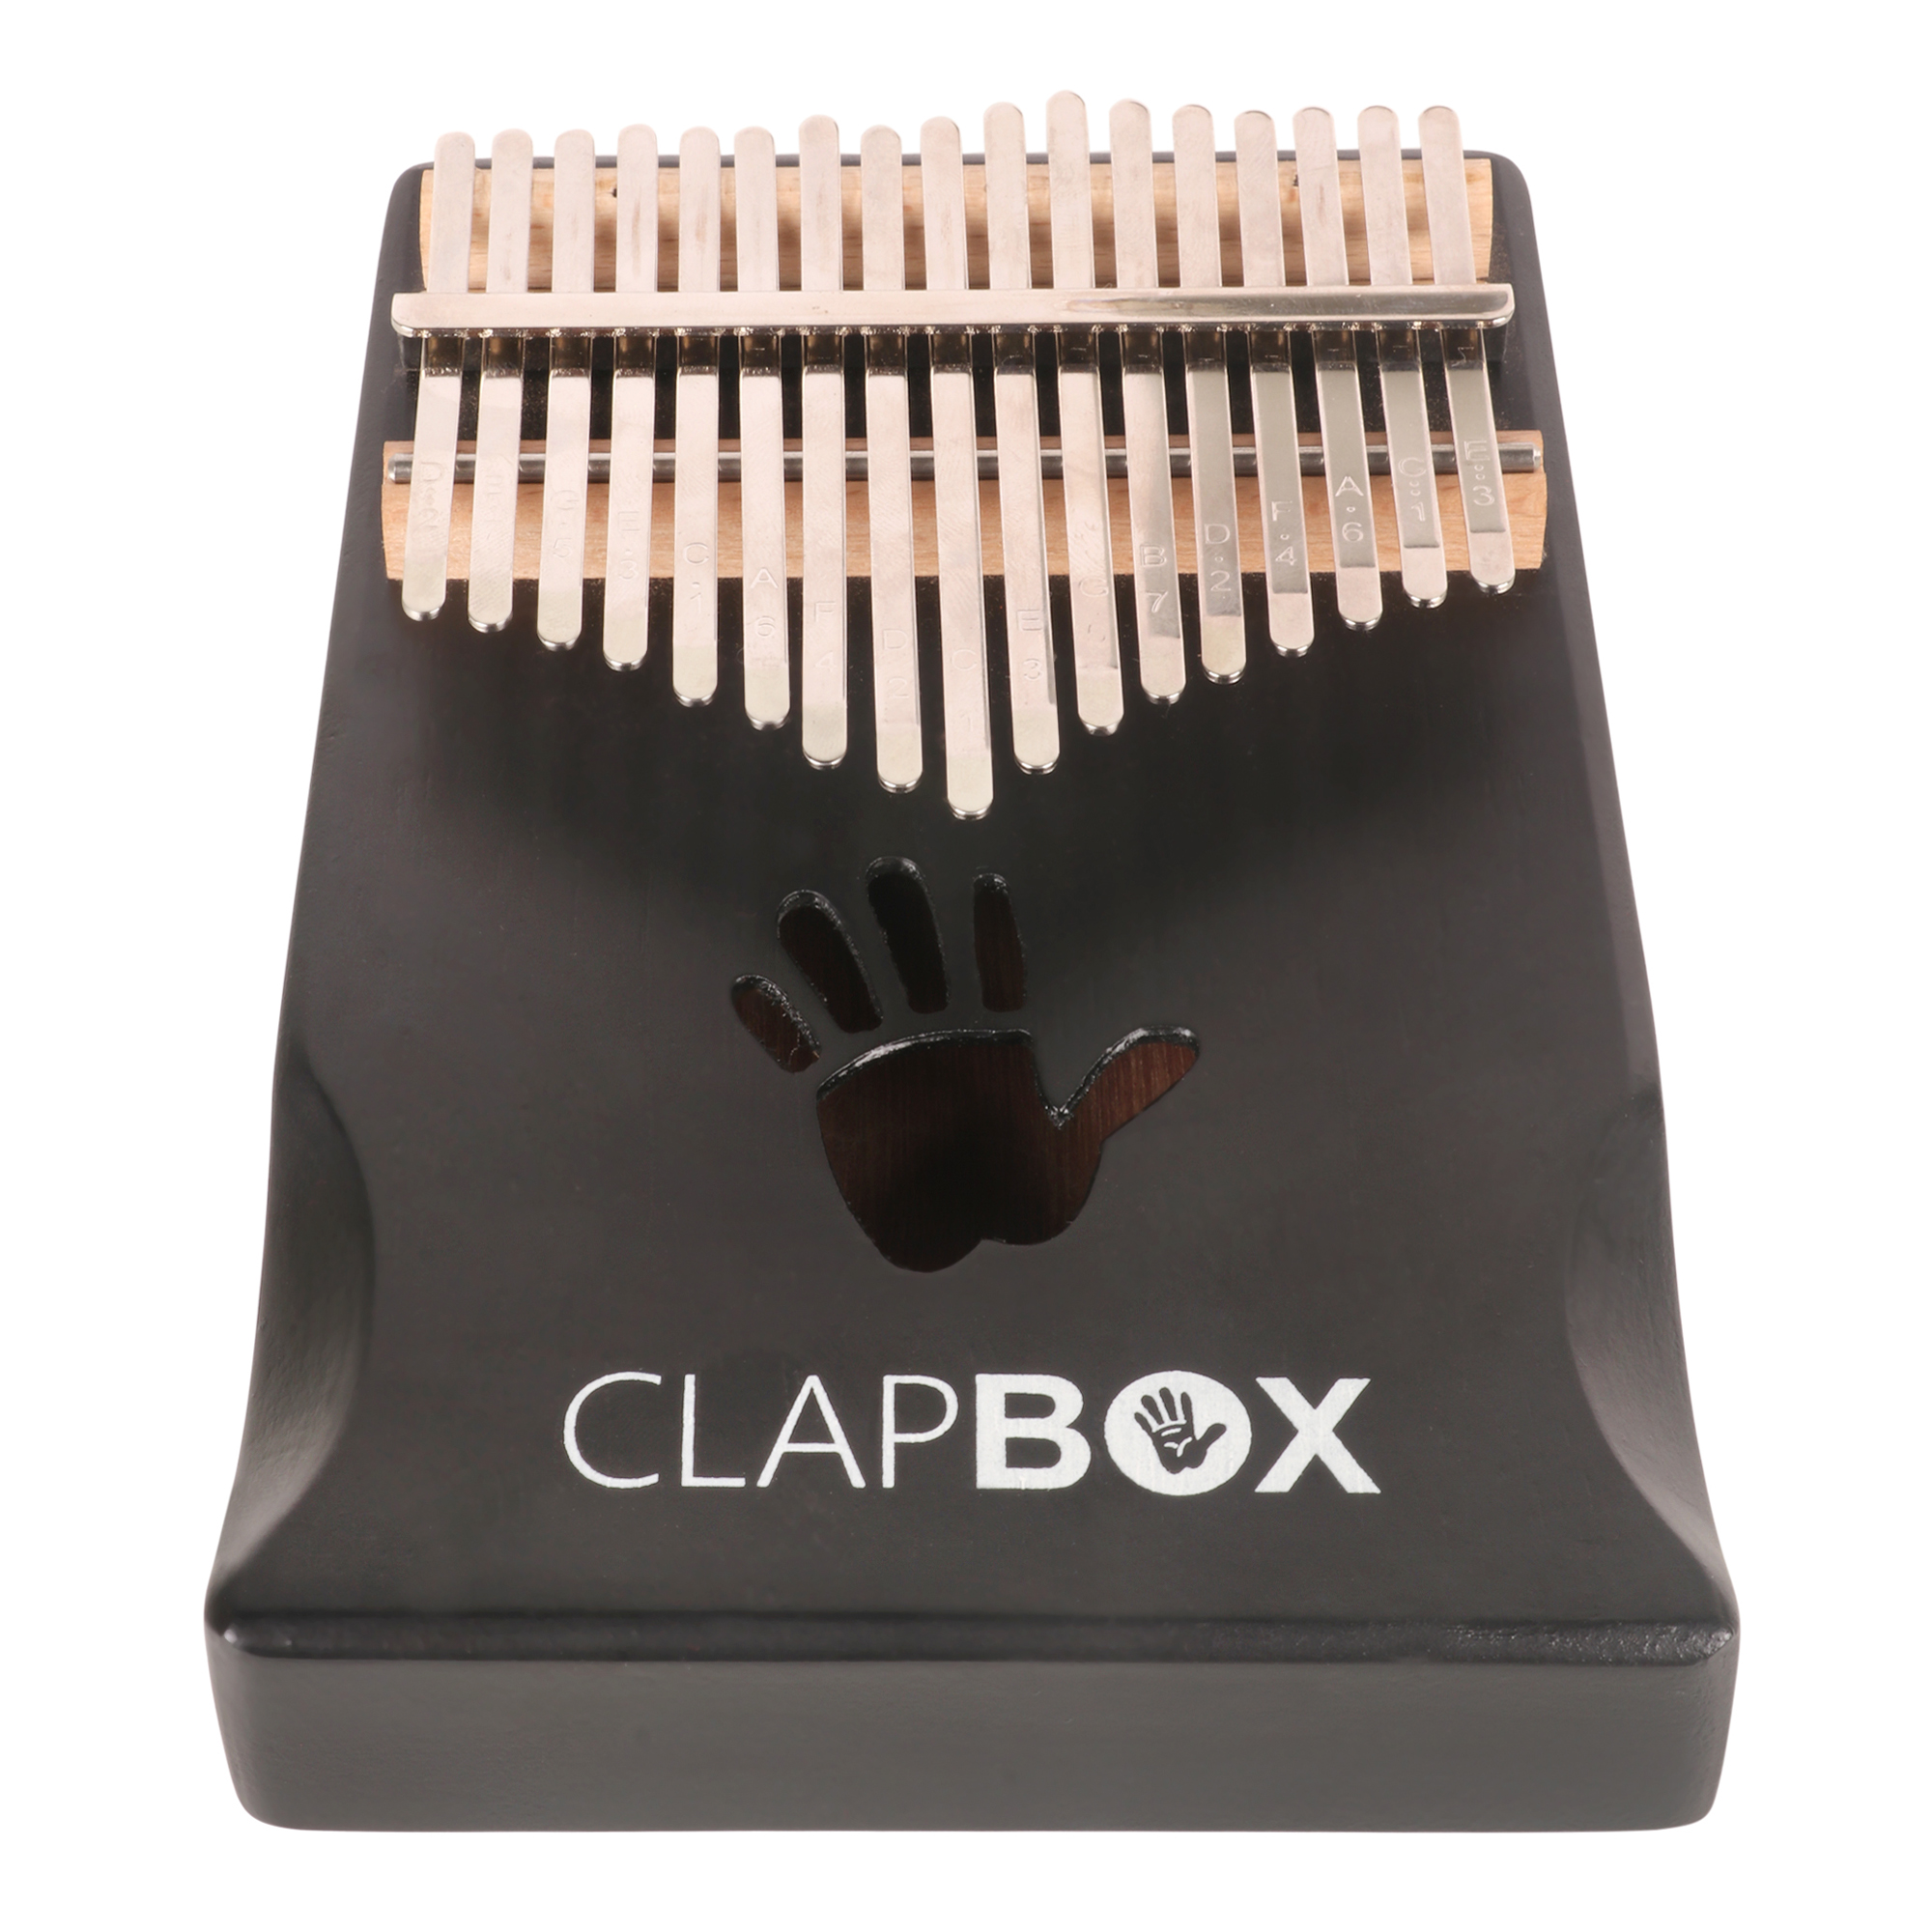 Clapbox 17 Keys Kalimba (Black) with Tune Hammer Online price in India